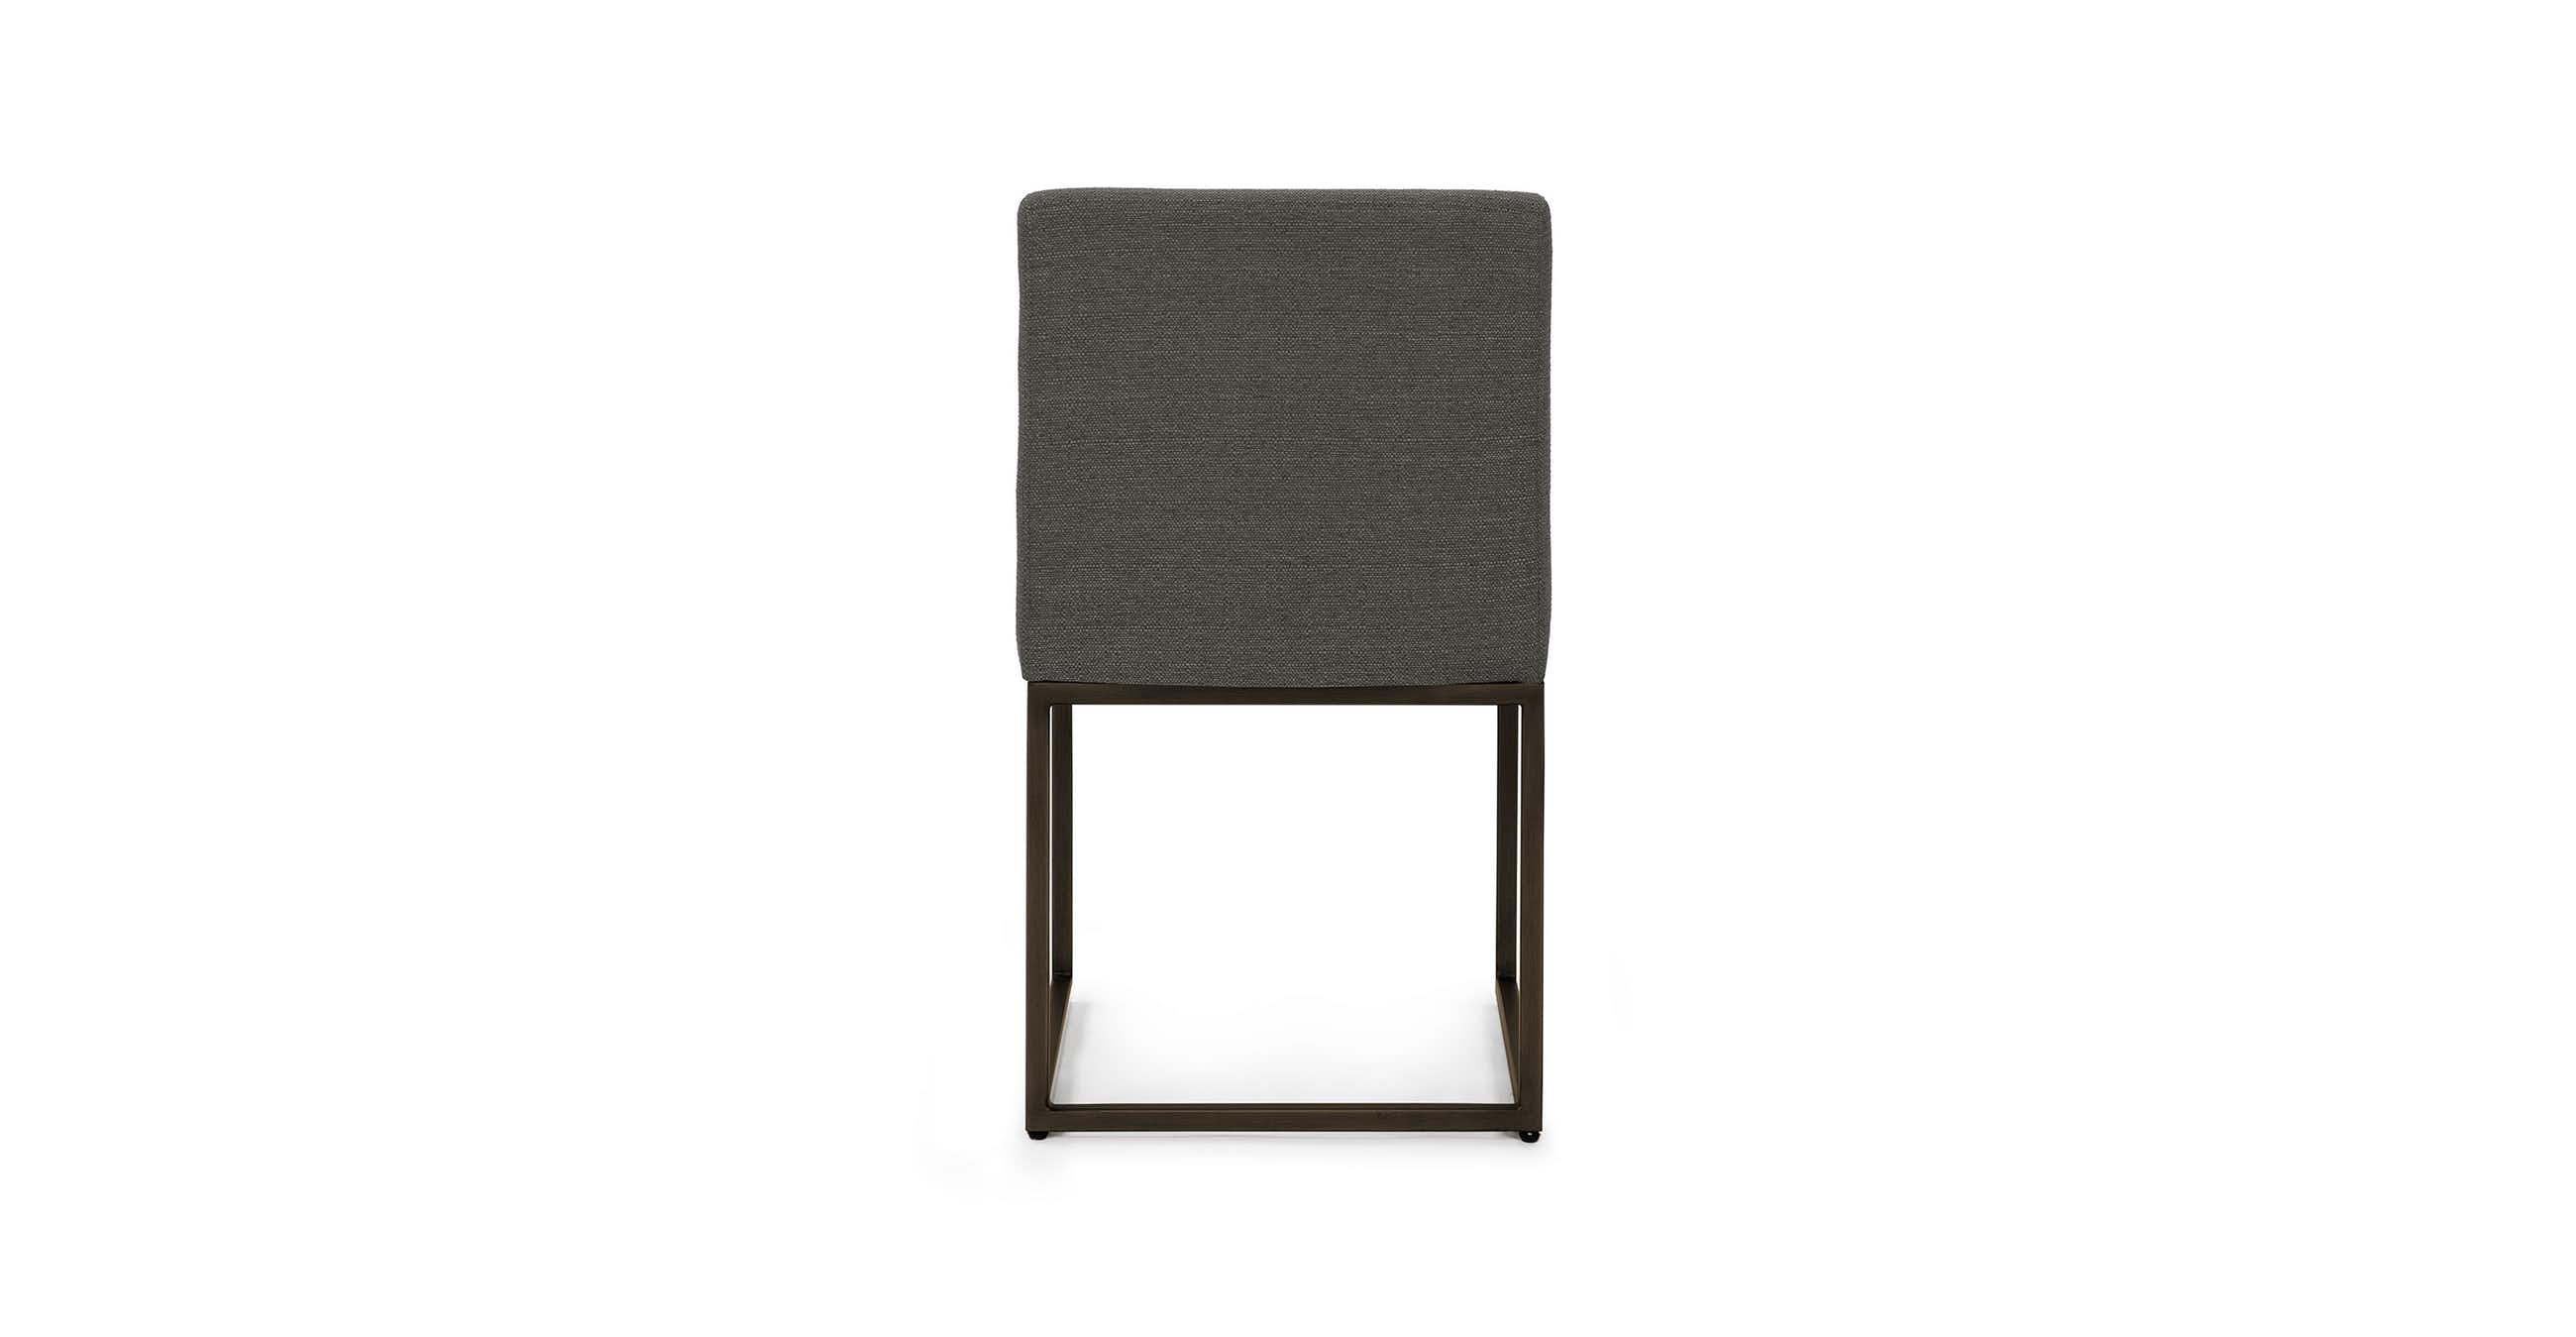 Oscuro Cinder Gray Dining Chair - Image 3